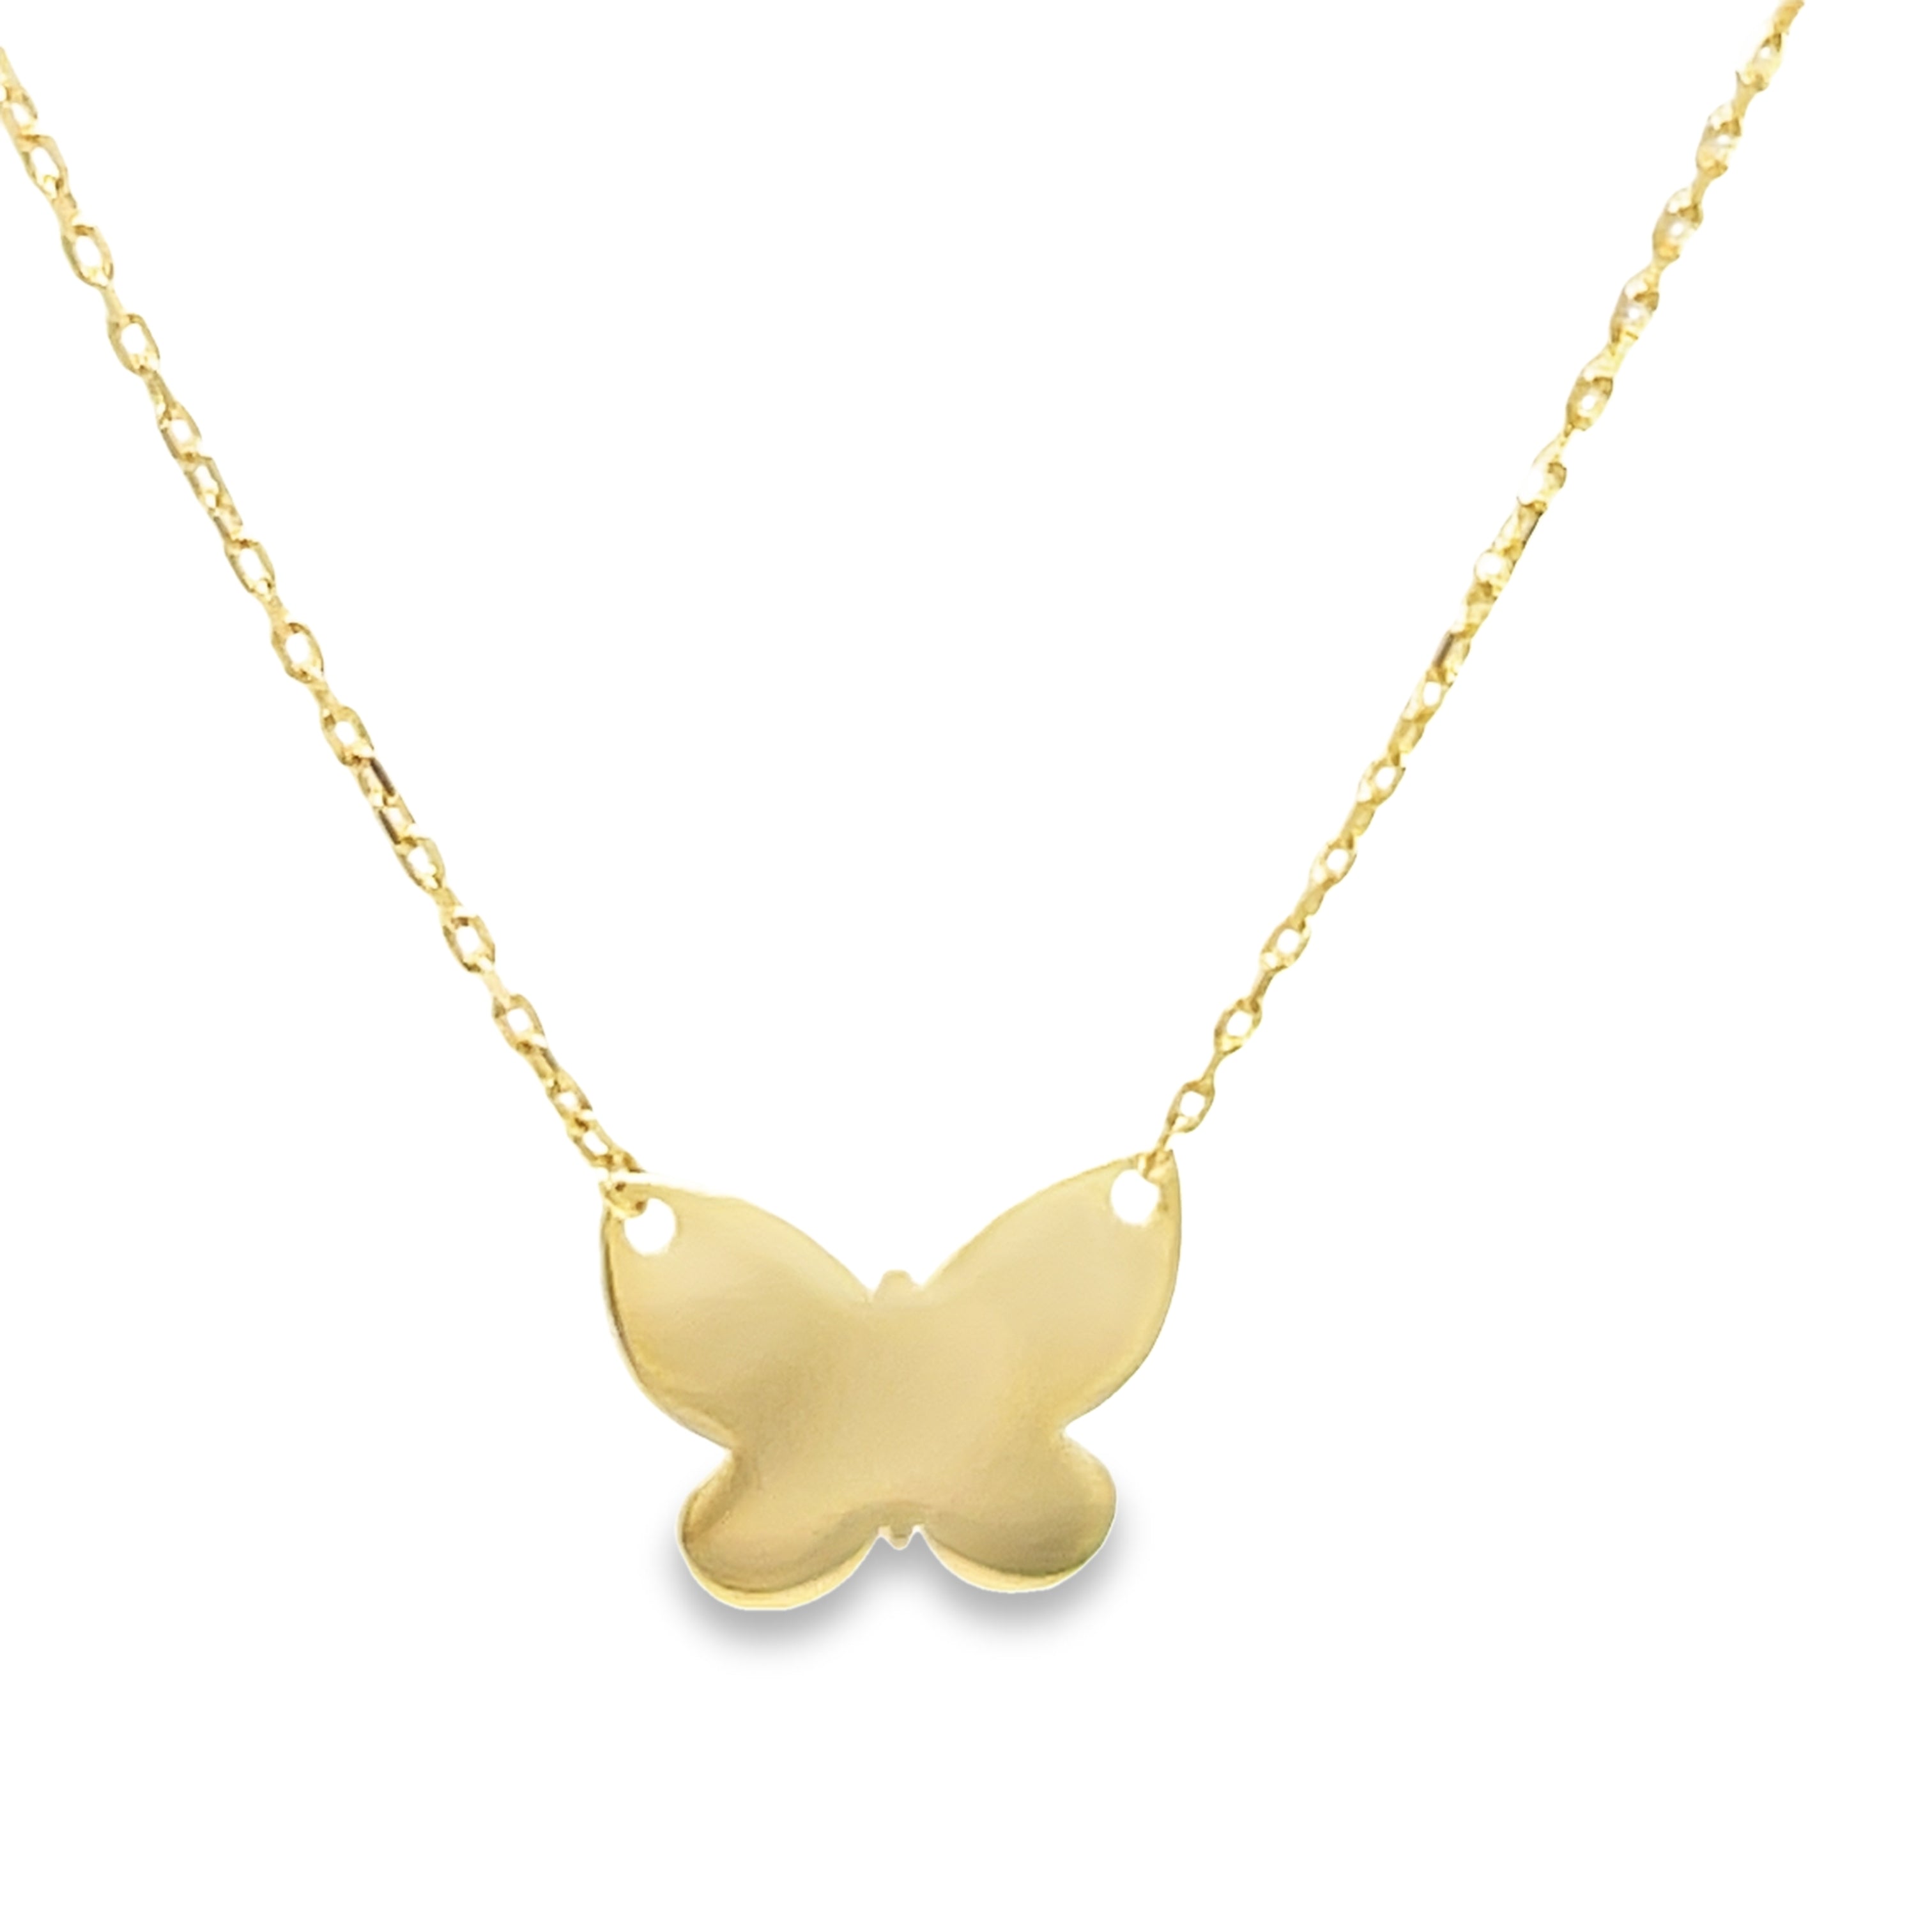 Enhance your everyday look with this stunning 14k Italian Yellow Gold Butterfly Necklace. Expertly crafted in Italy, it features a secure lobster clasp and adjustable 18" length for the perfect fit. The delicate butterfly pendant adds a touch of elegance and charm to any outfit. Elevate your style with this must-have accessory!